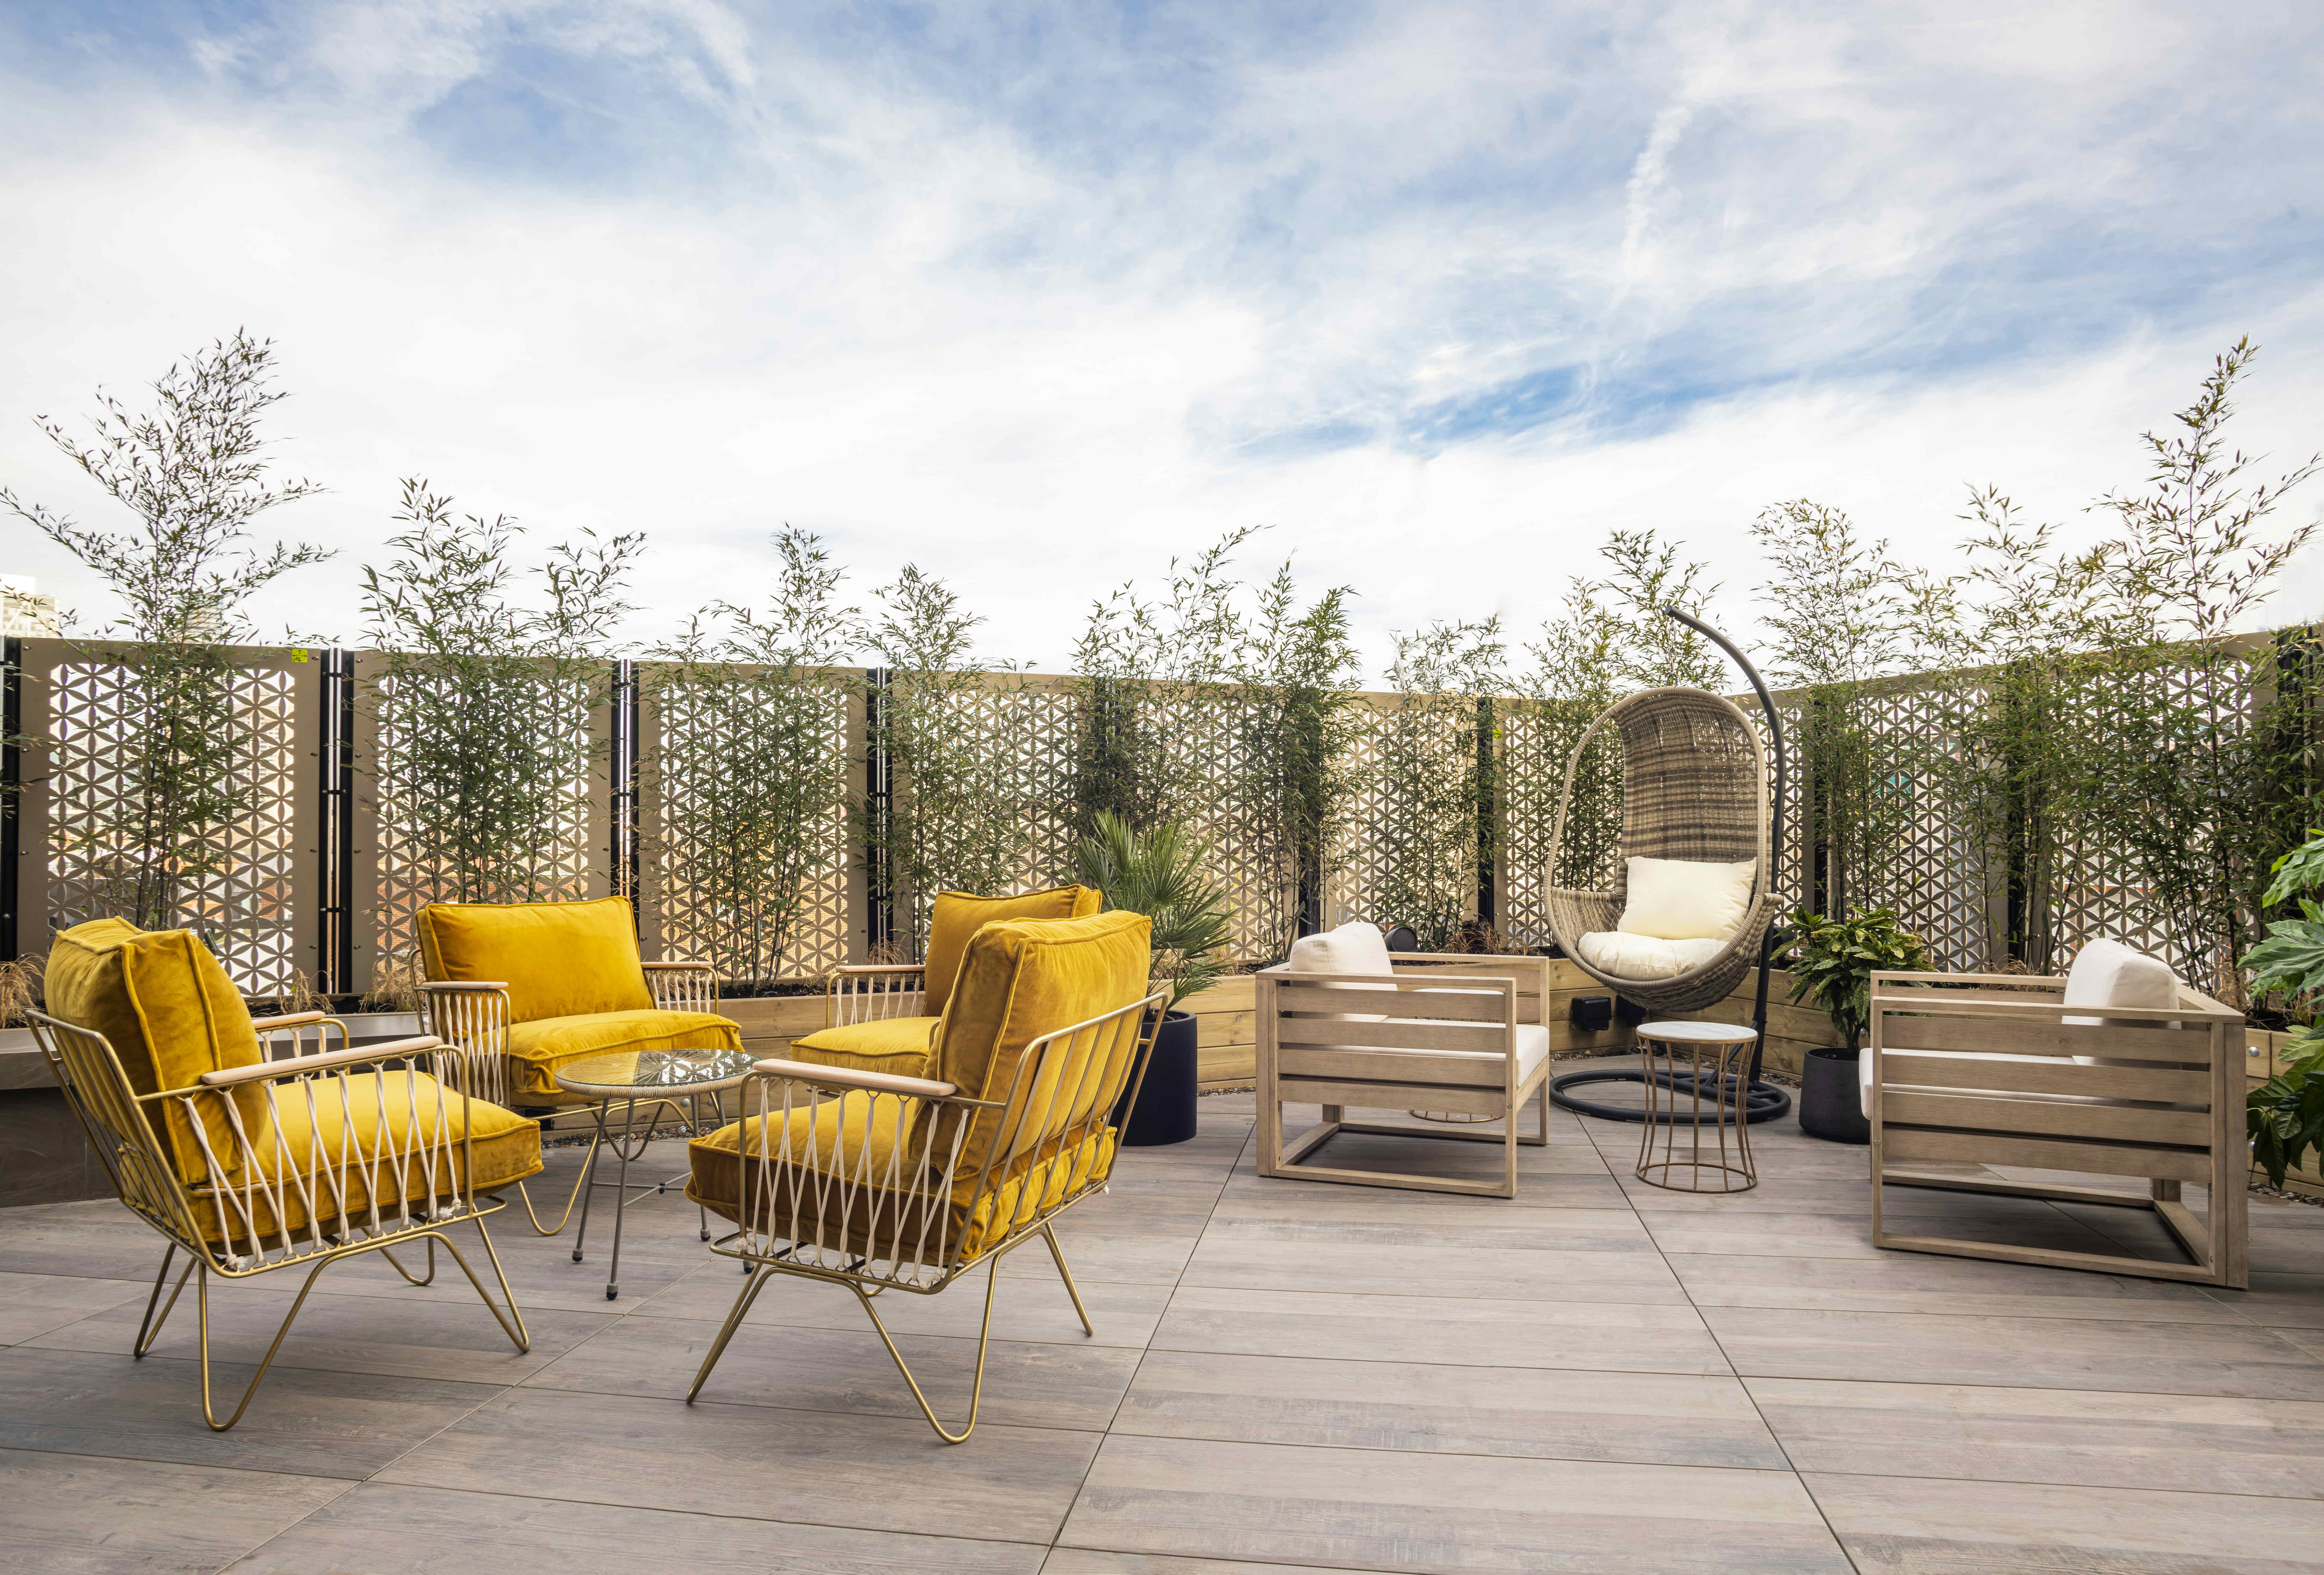 Terrace with London Skyline views, The Gate Hotel - Aldgate East, London